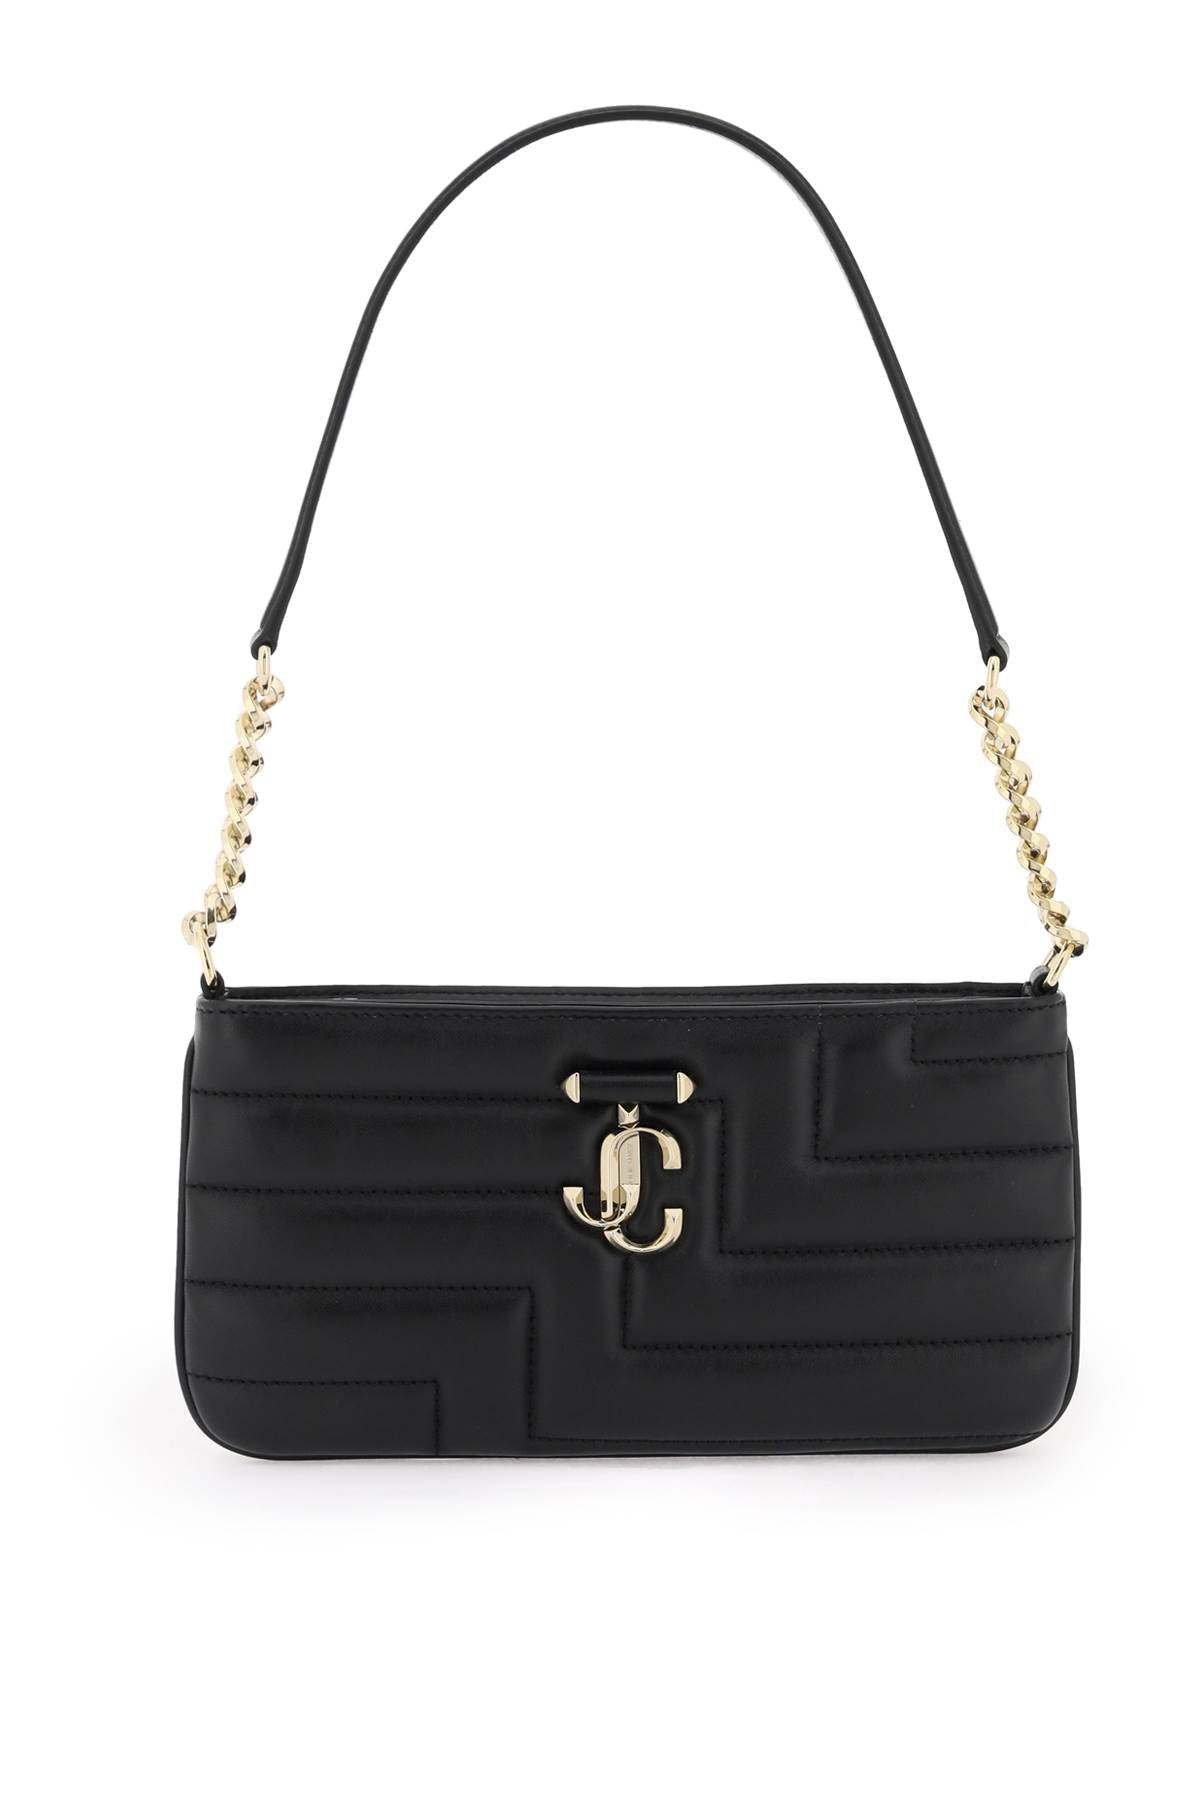 JIMMY CHOO Quilted Leather Slim Shoulder Bag with Gold Monogram and Chain Handle